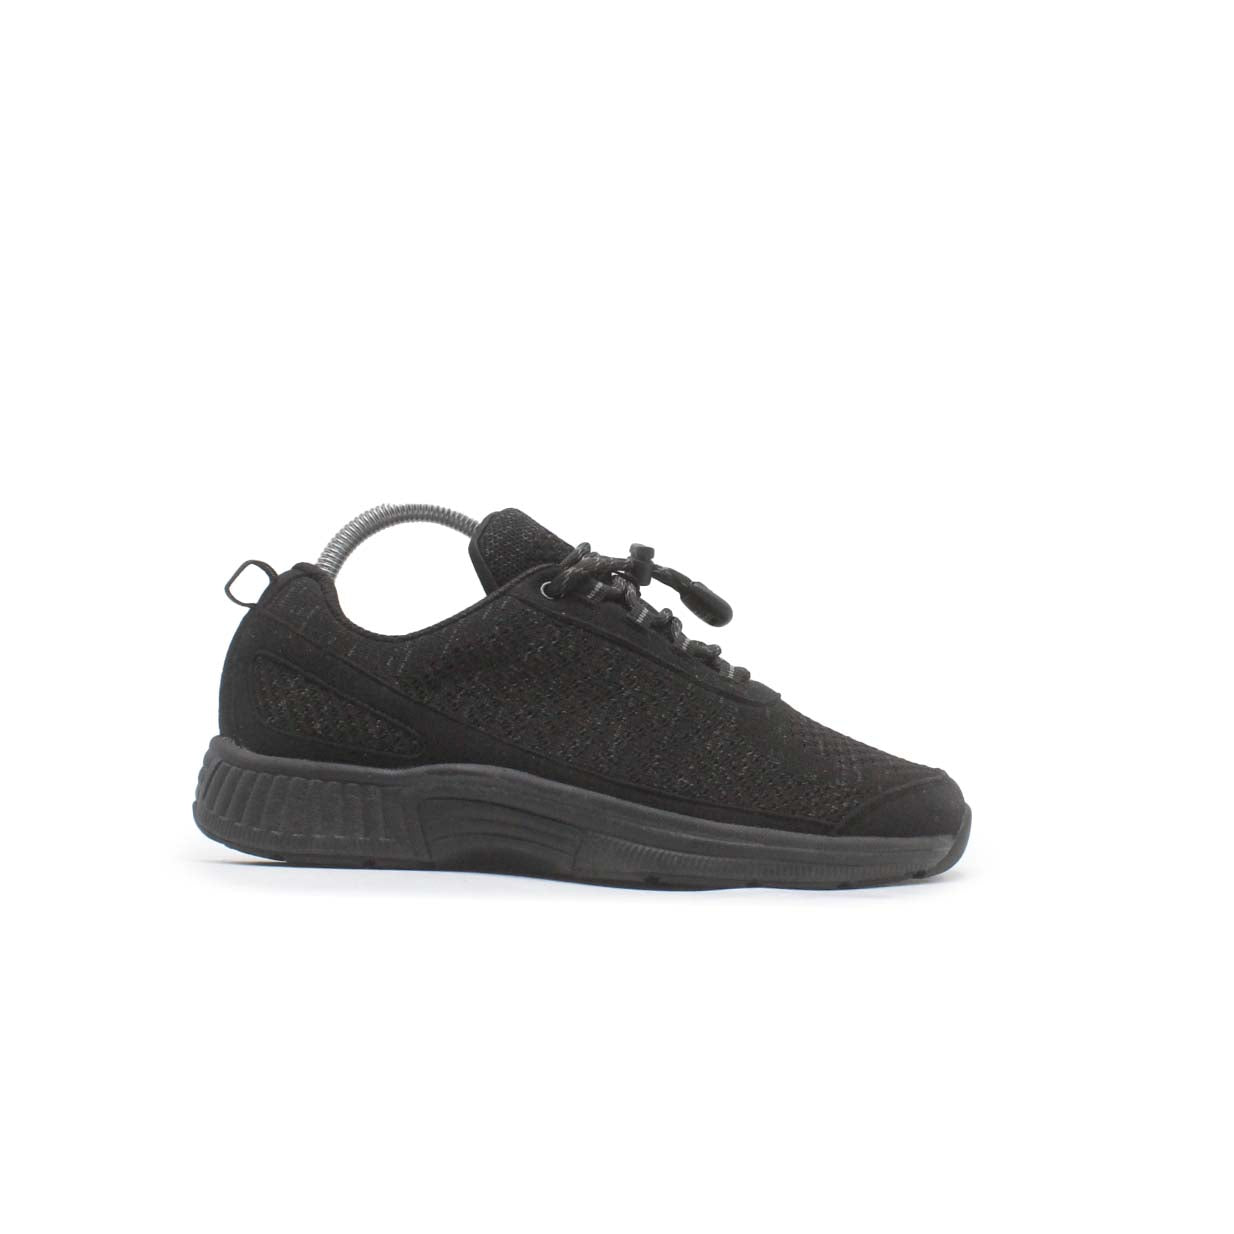 Orthofeet Coral No-Tie Lace Black Walking Shoe